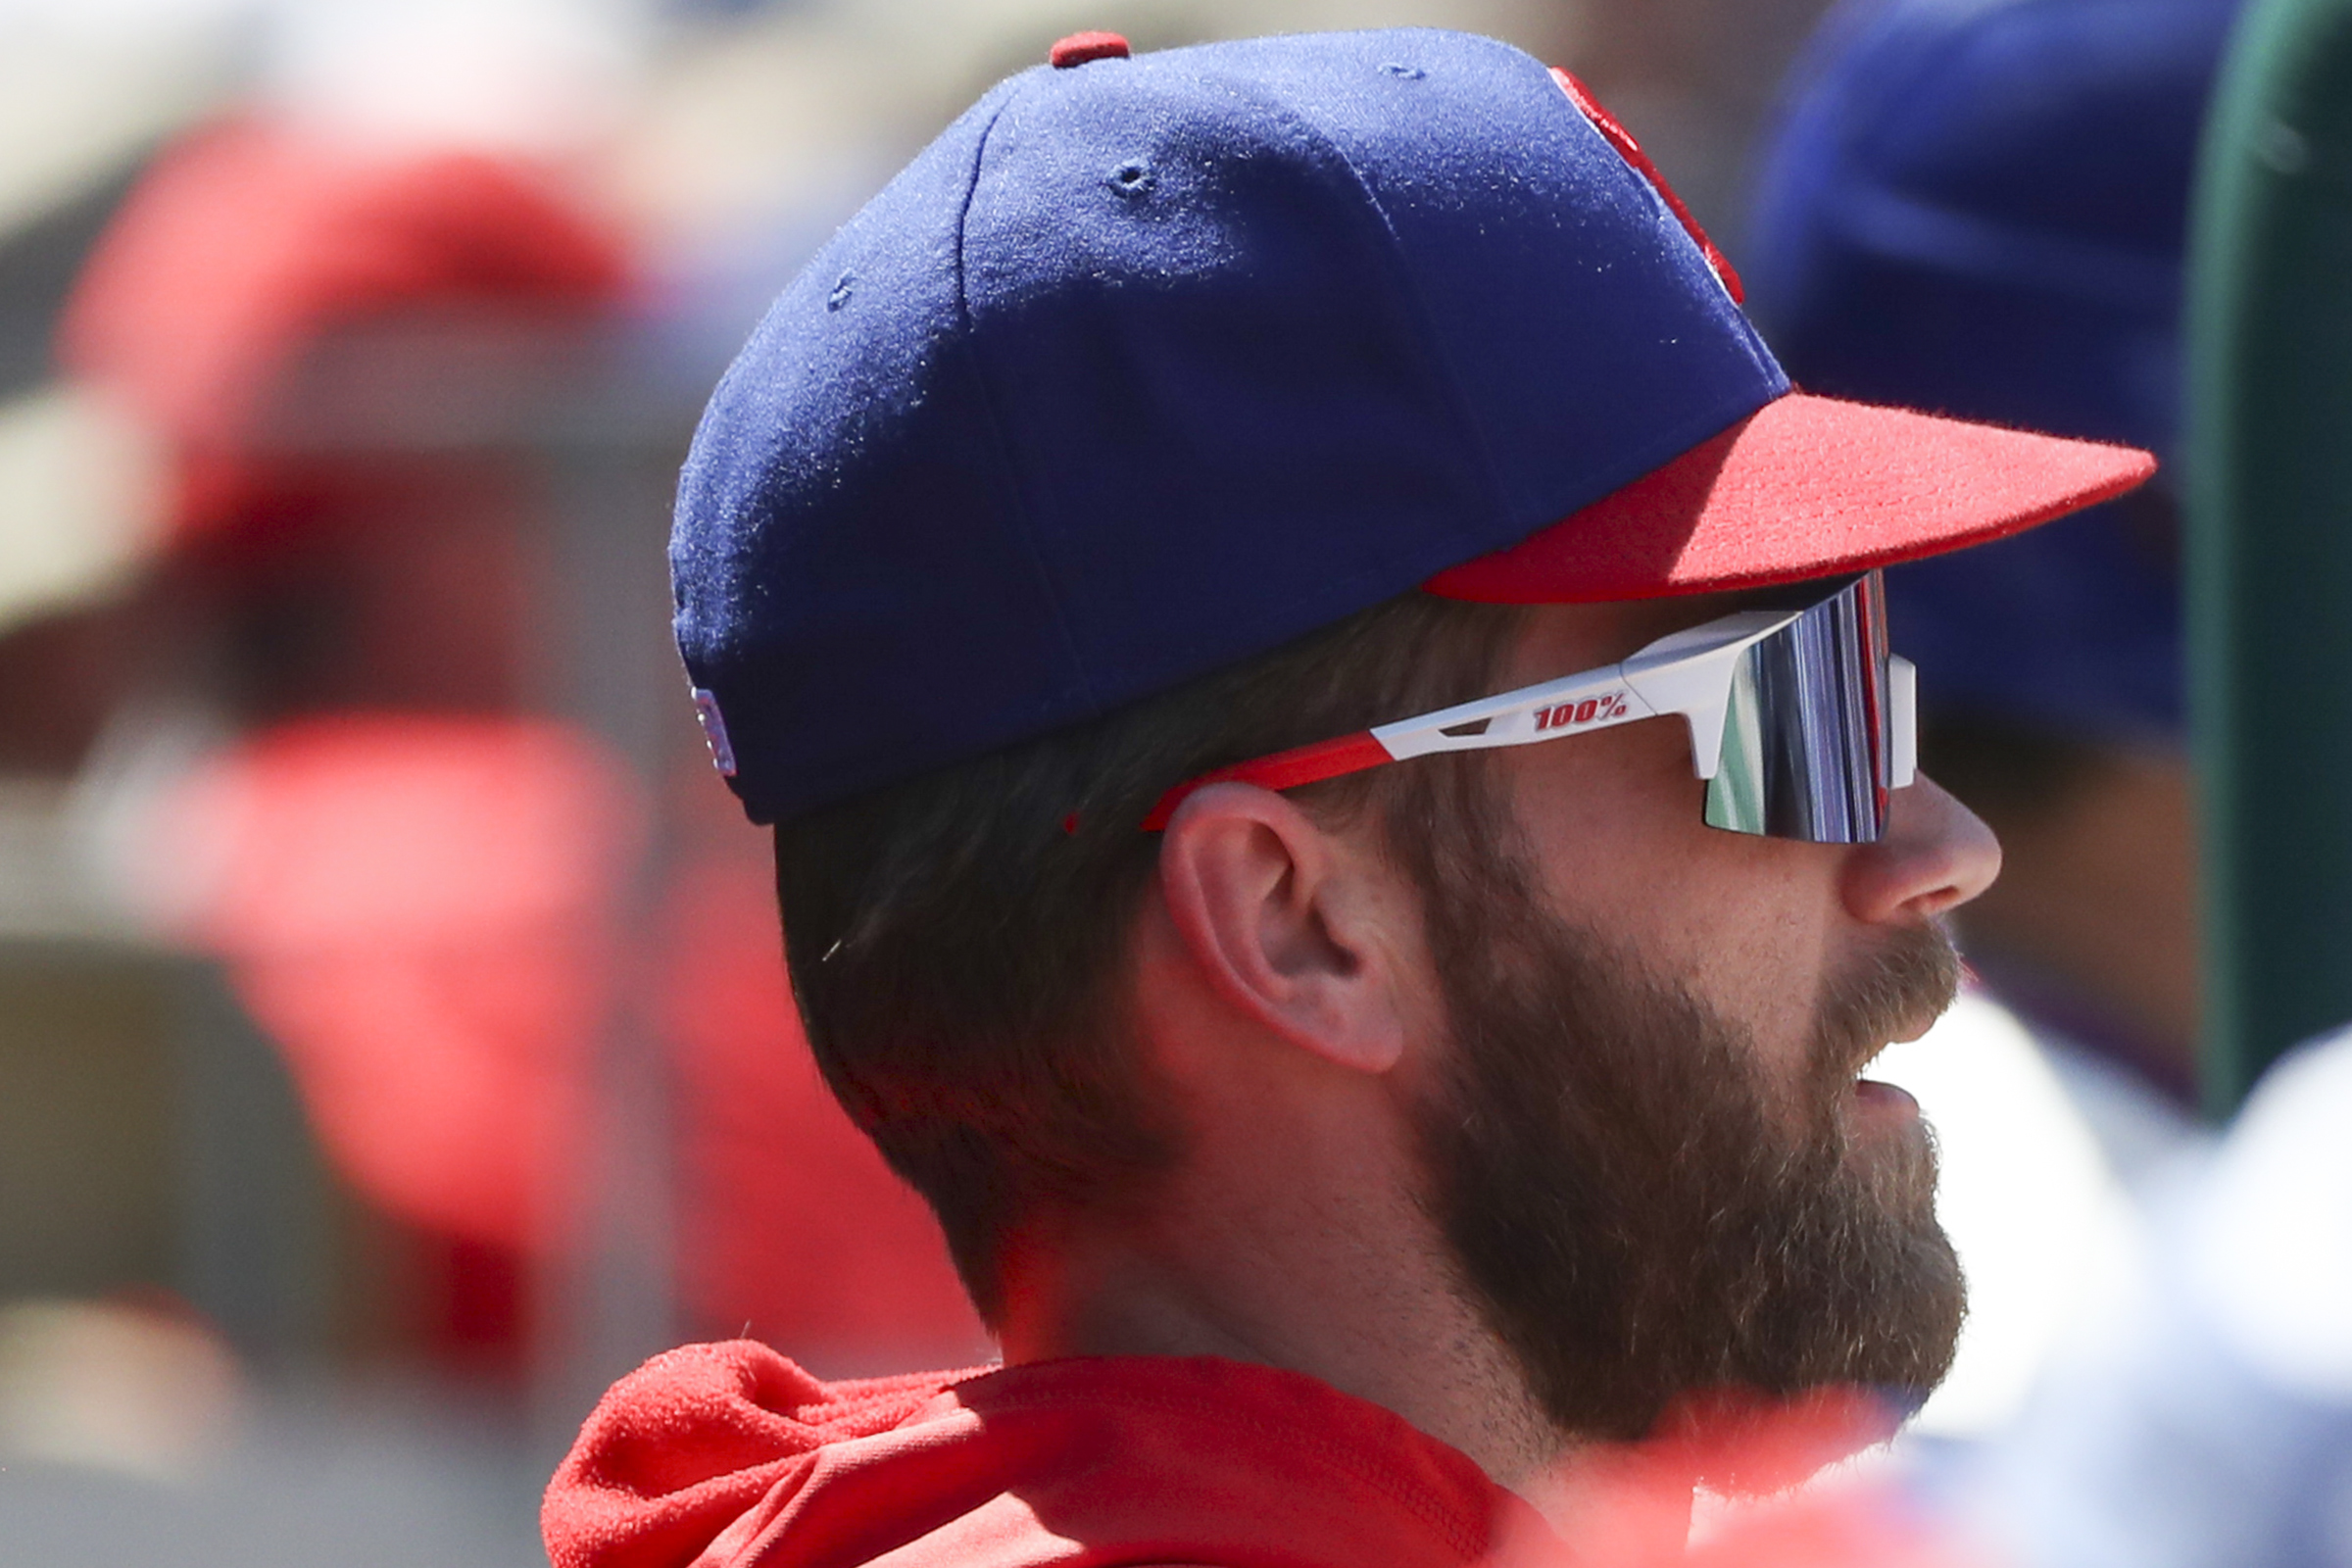 Bryce Harper's thumb improving, could return to Phillies by Sept. 1